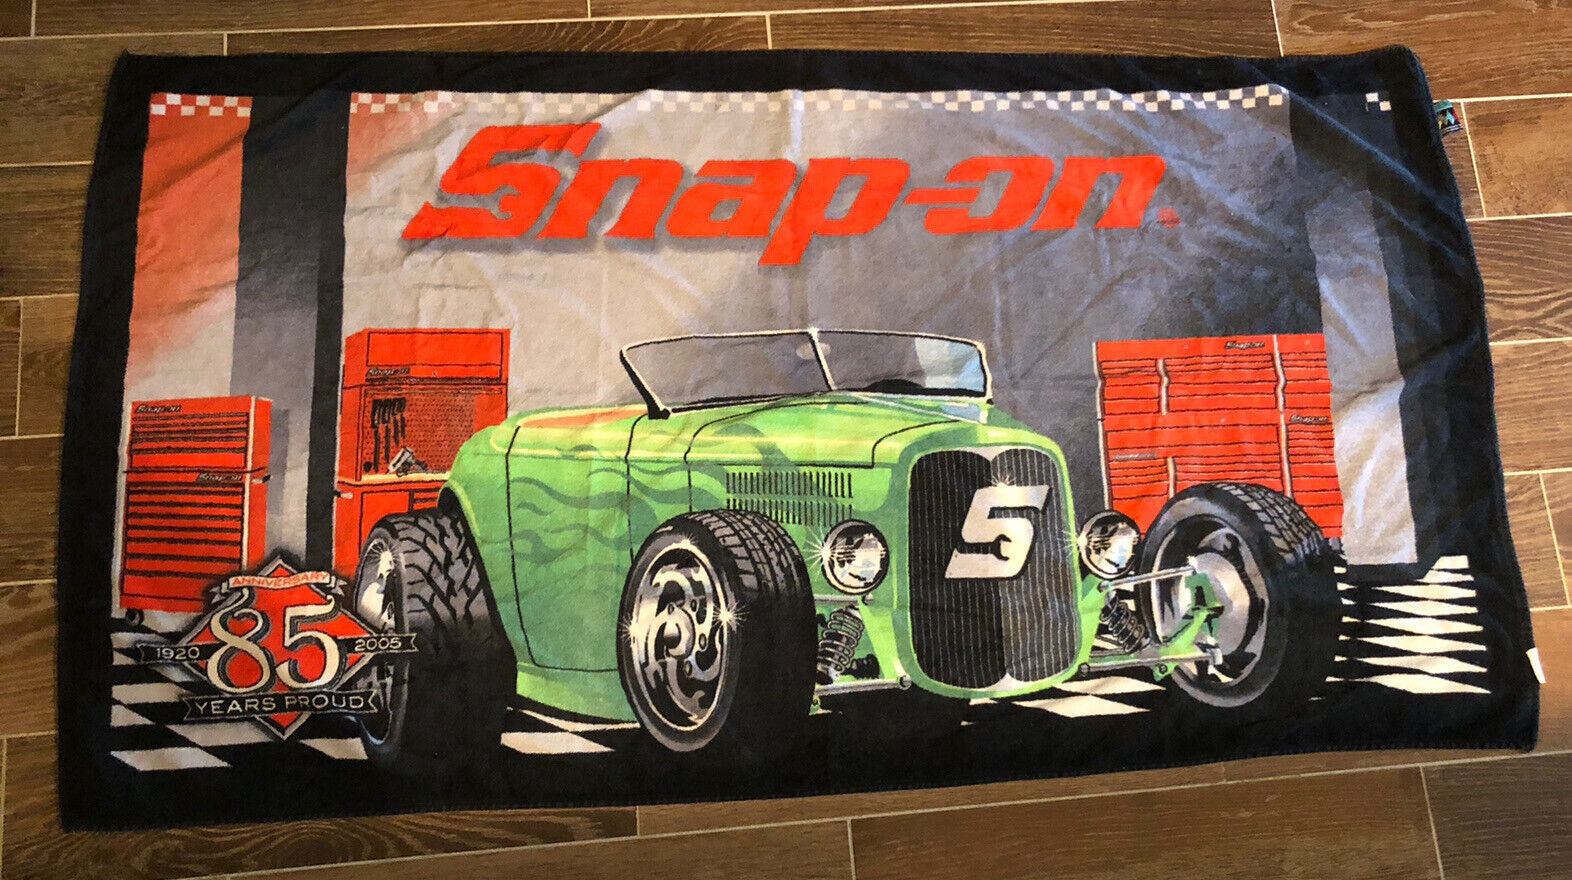 2005 85th Anniversary Snap-on Tools Beach Towel Deuce Coupe Hot Rod